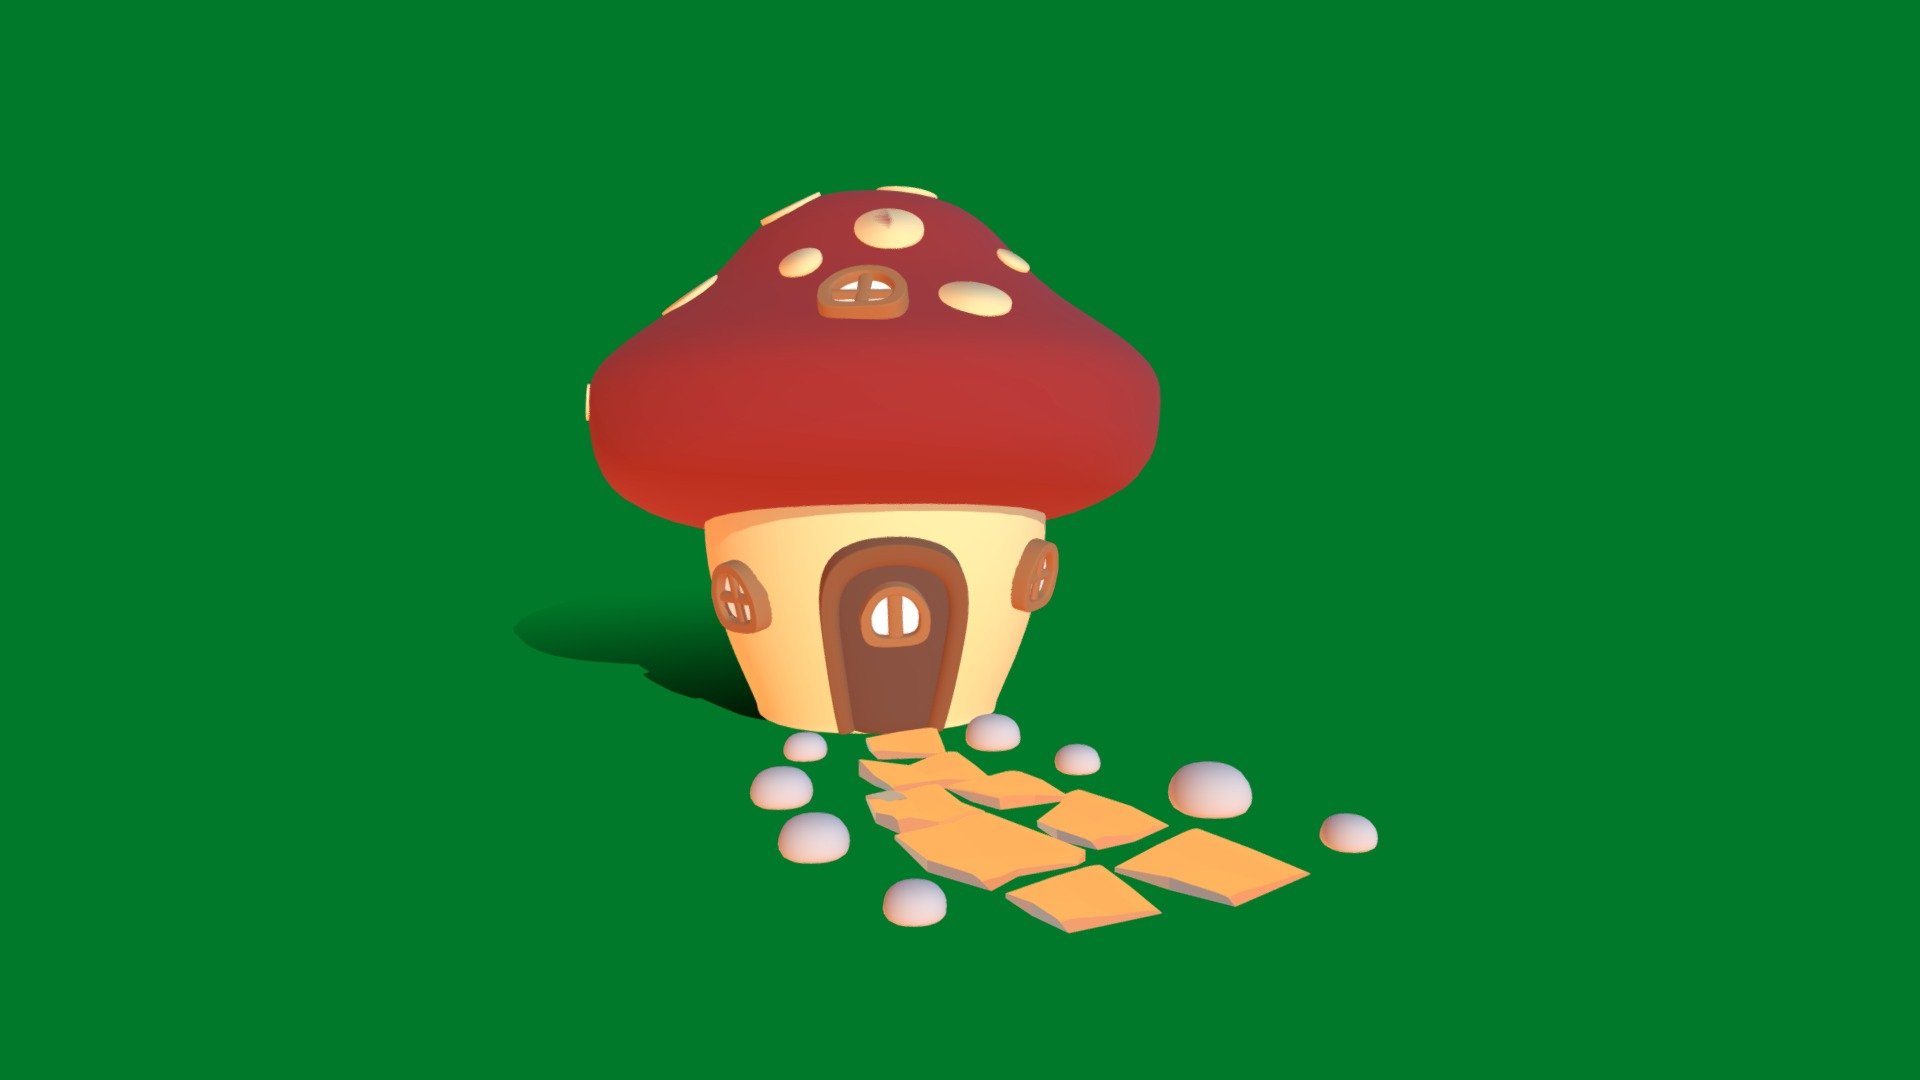 3D MUSHROOM -HOUSE - Modeling in blender 3D fairy house with windows and road with small rocks - 3D MASHROOM HOUSE - 3D model by RiverofCreative 3d model